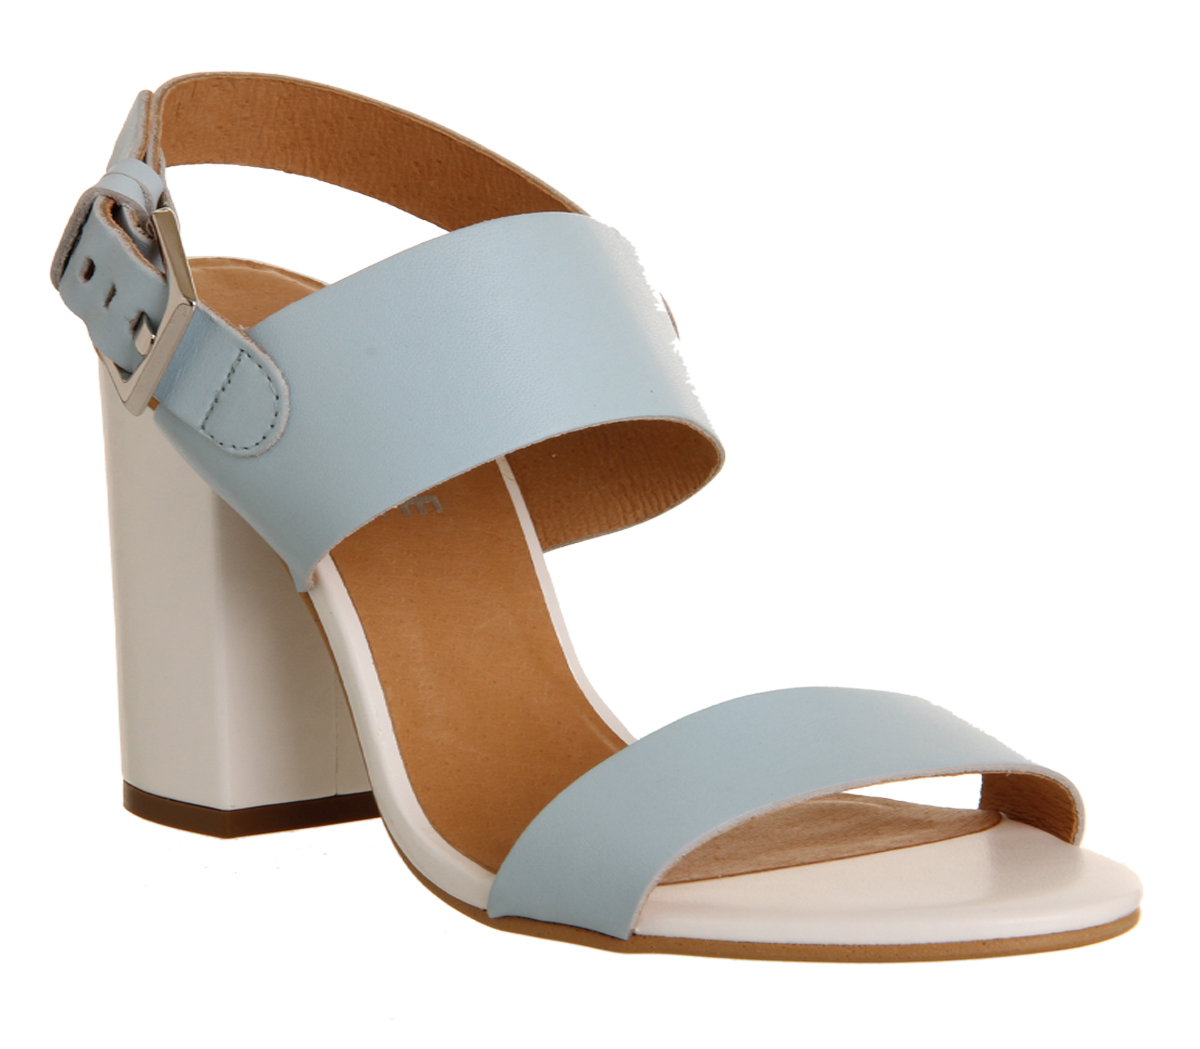 OFFICEGarland Strappy Block HeelPale Blue Leather